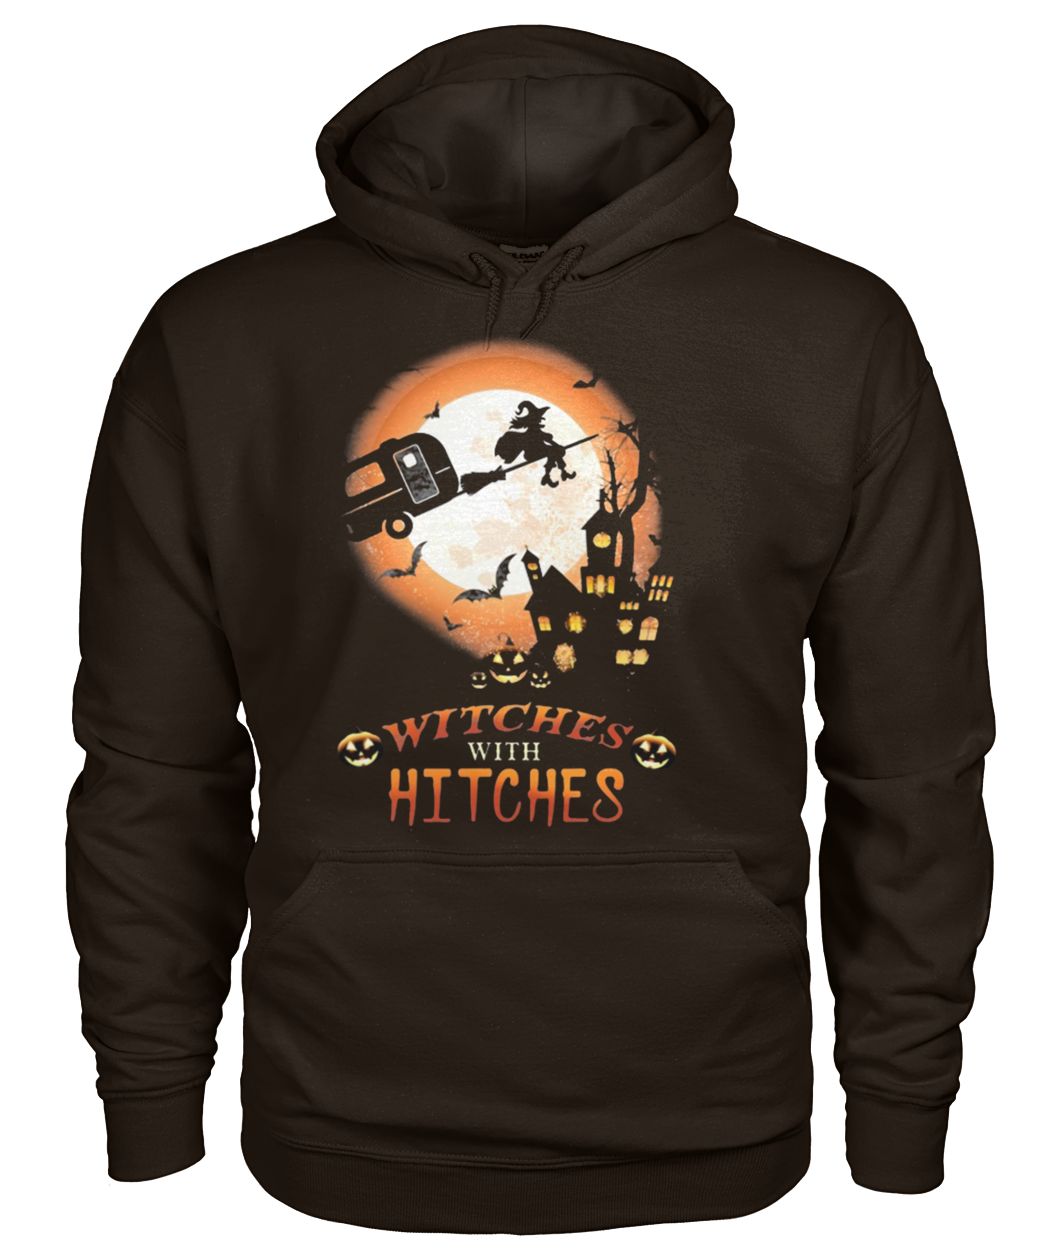 Witches with hitches halloween gildan hoodie